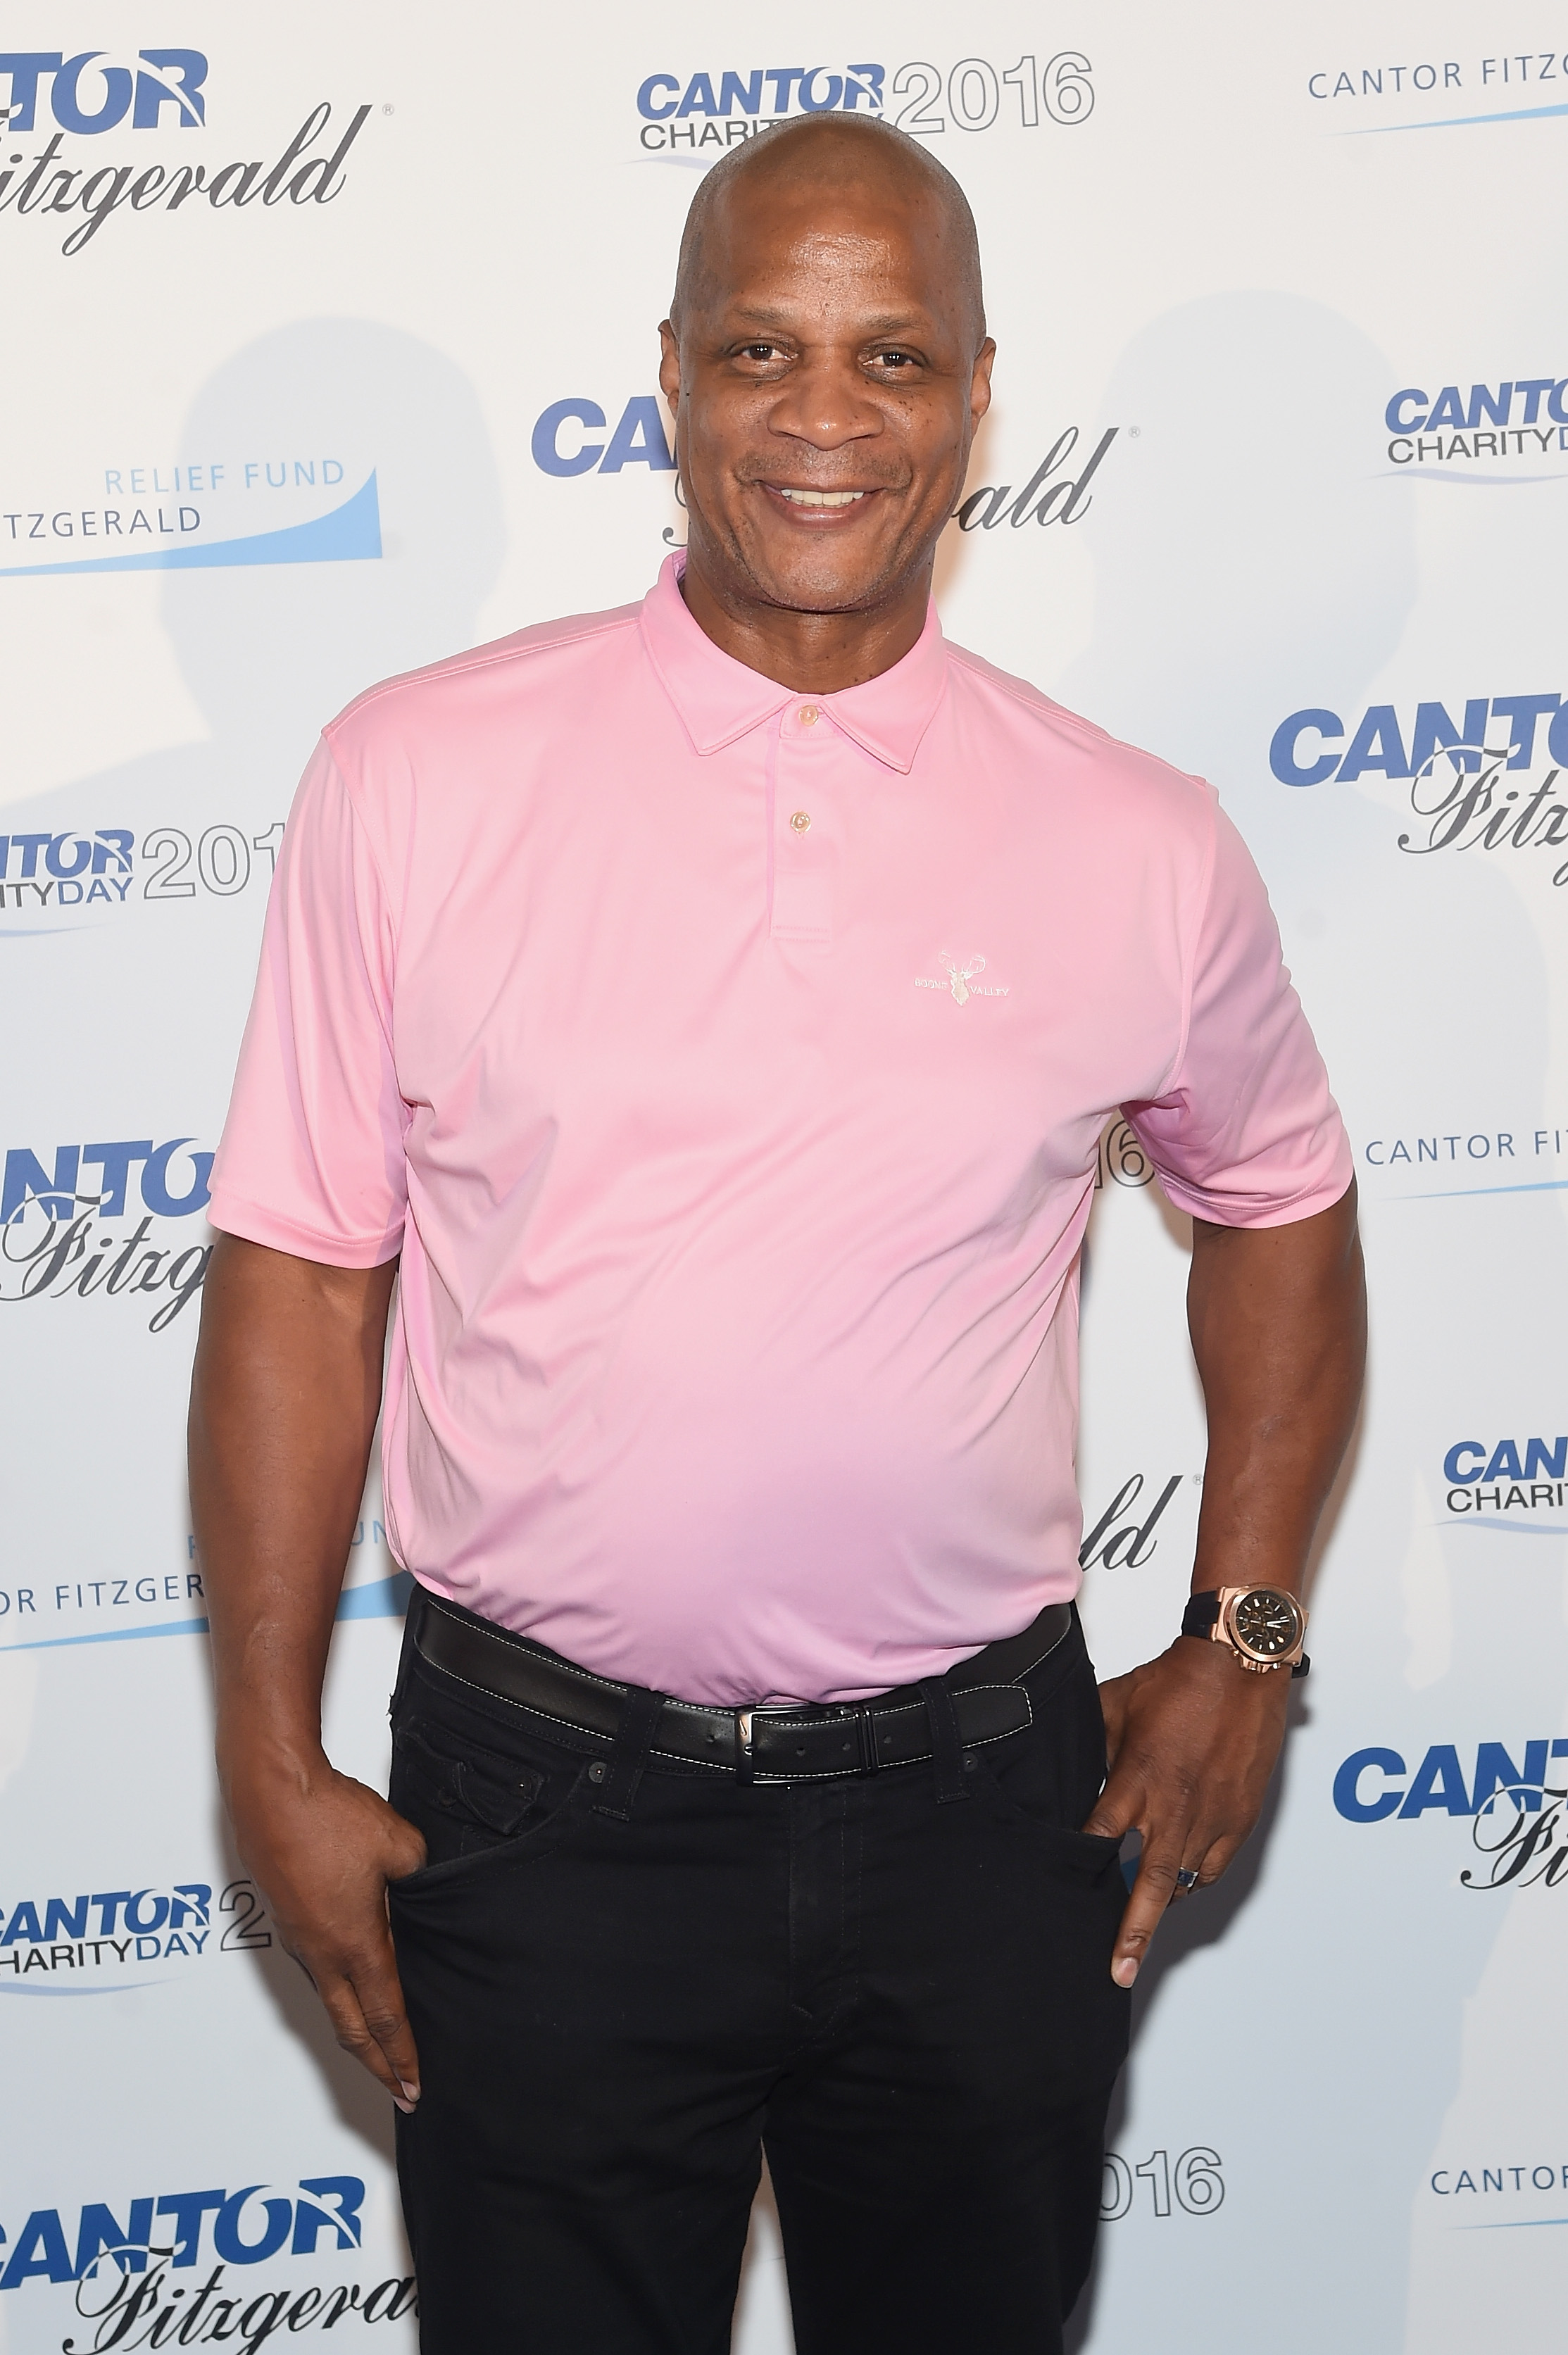 Annual Charity Day Hosted By Cantor Fitzgerald, BGC and GFI - Cantor Fitzgerald Office - Arrivals